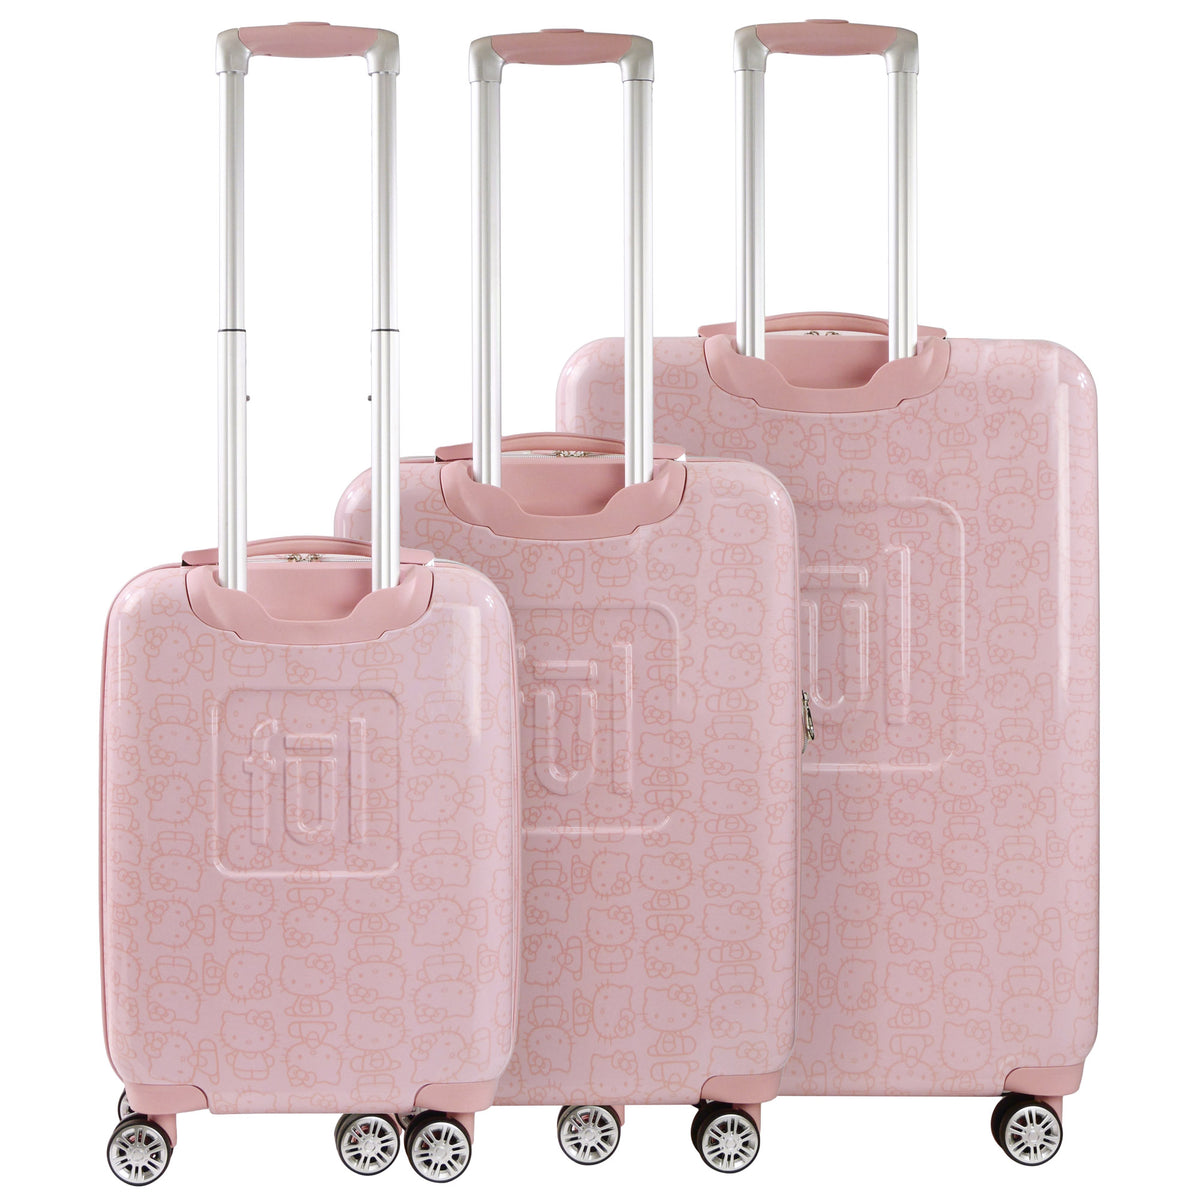 Hello Kitty x FUL Pose 3-Pc Hardshell Luggage (Pink) Travel Concept 1   